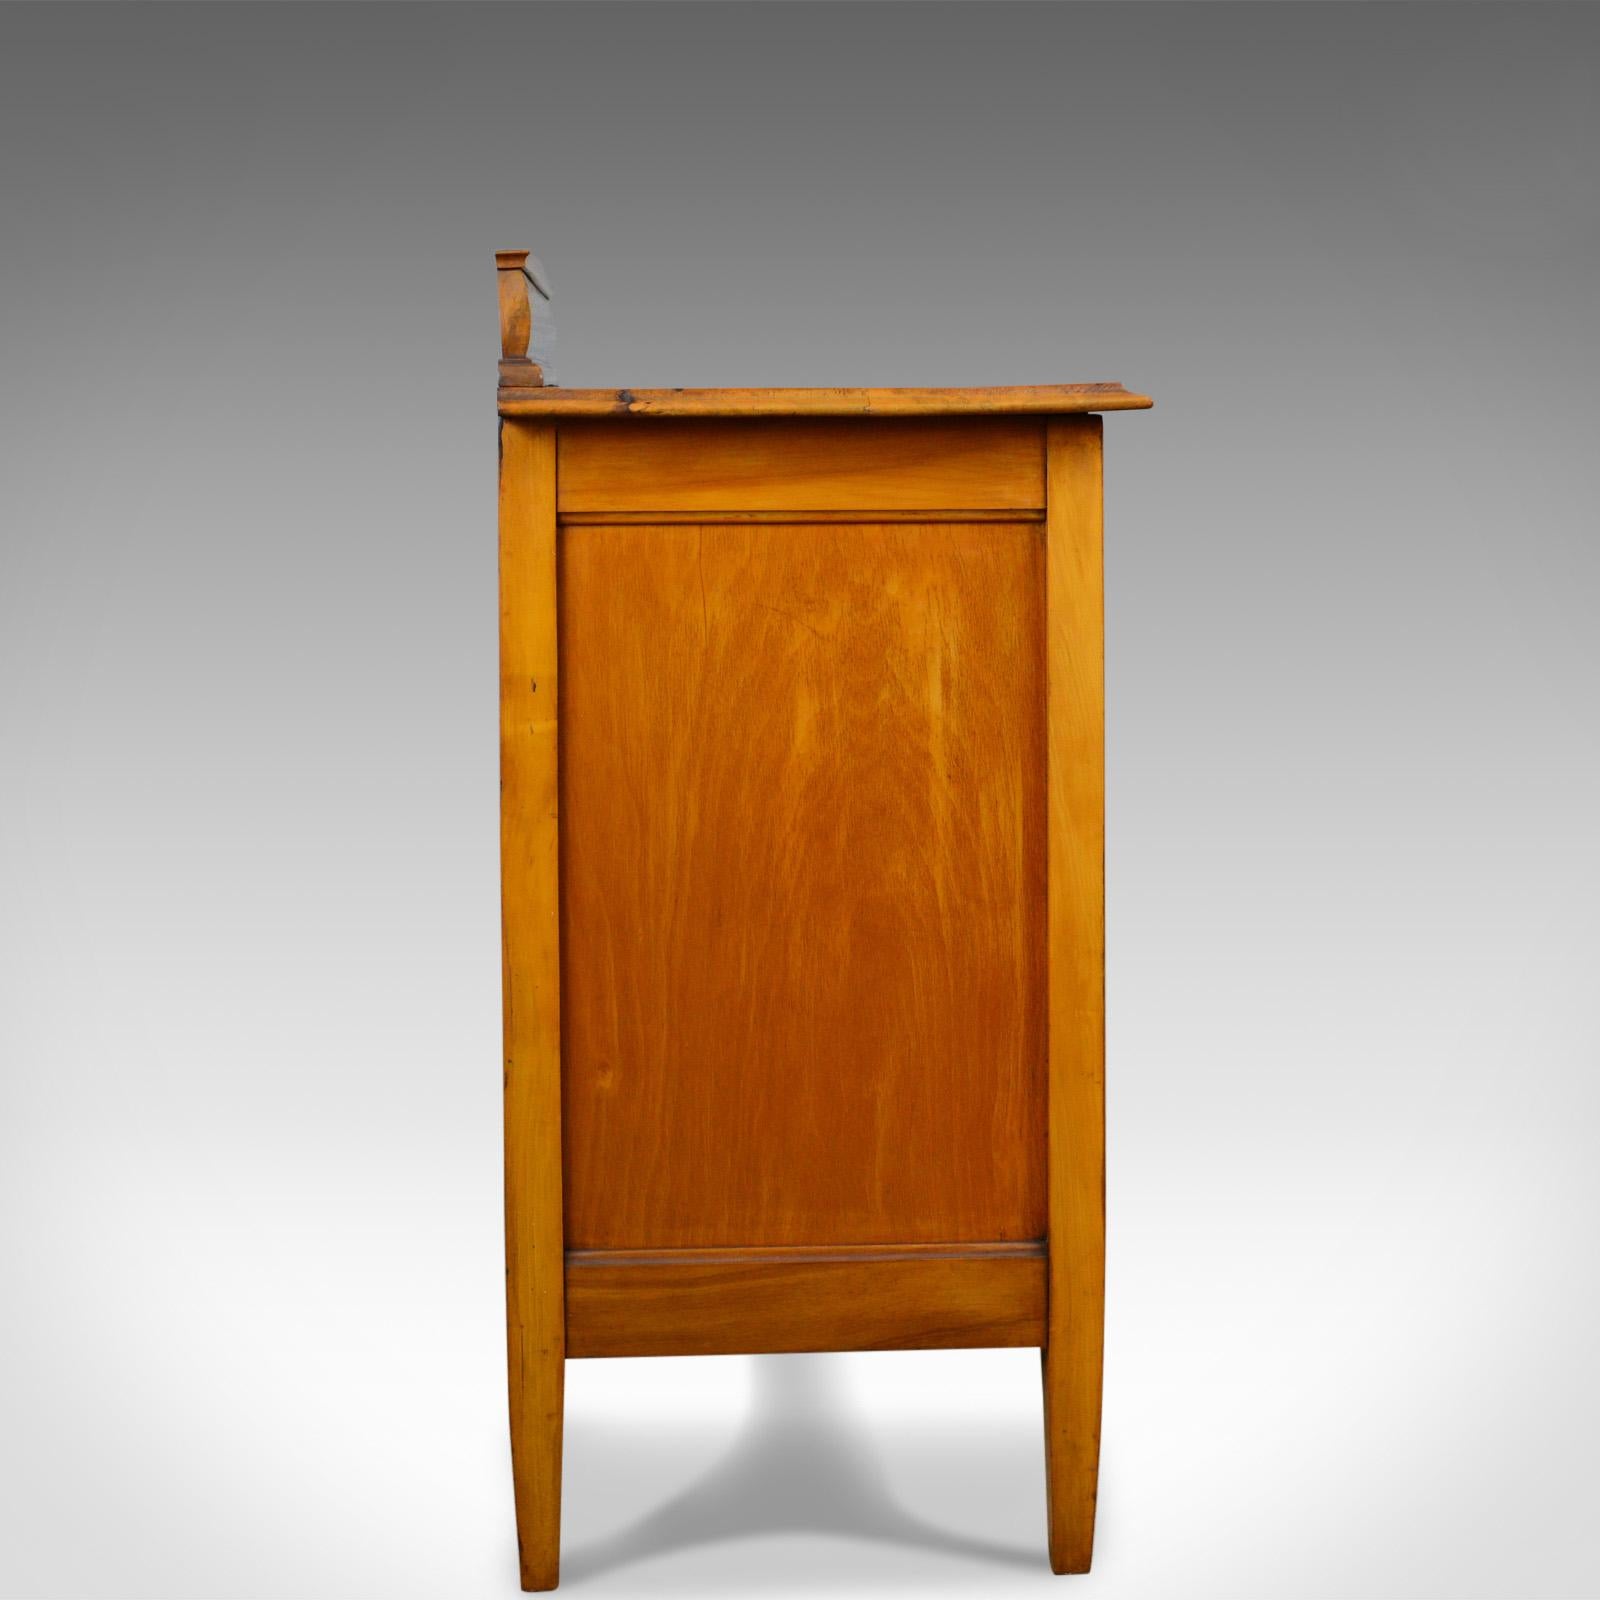 Late Victorian Antique Chest of Drawers, Satin Figured Walnut, English, Victorian, circa 1900